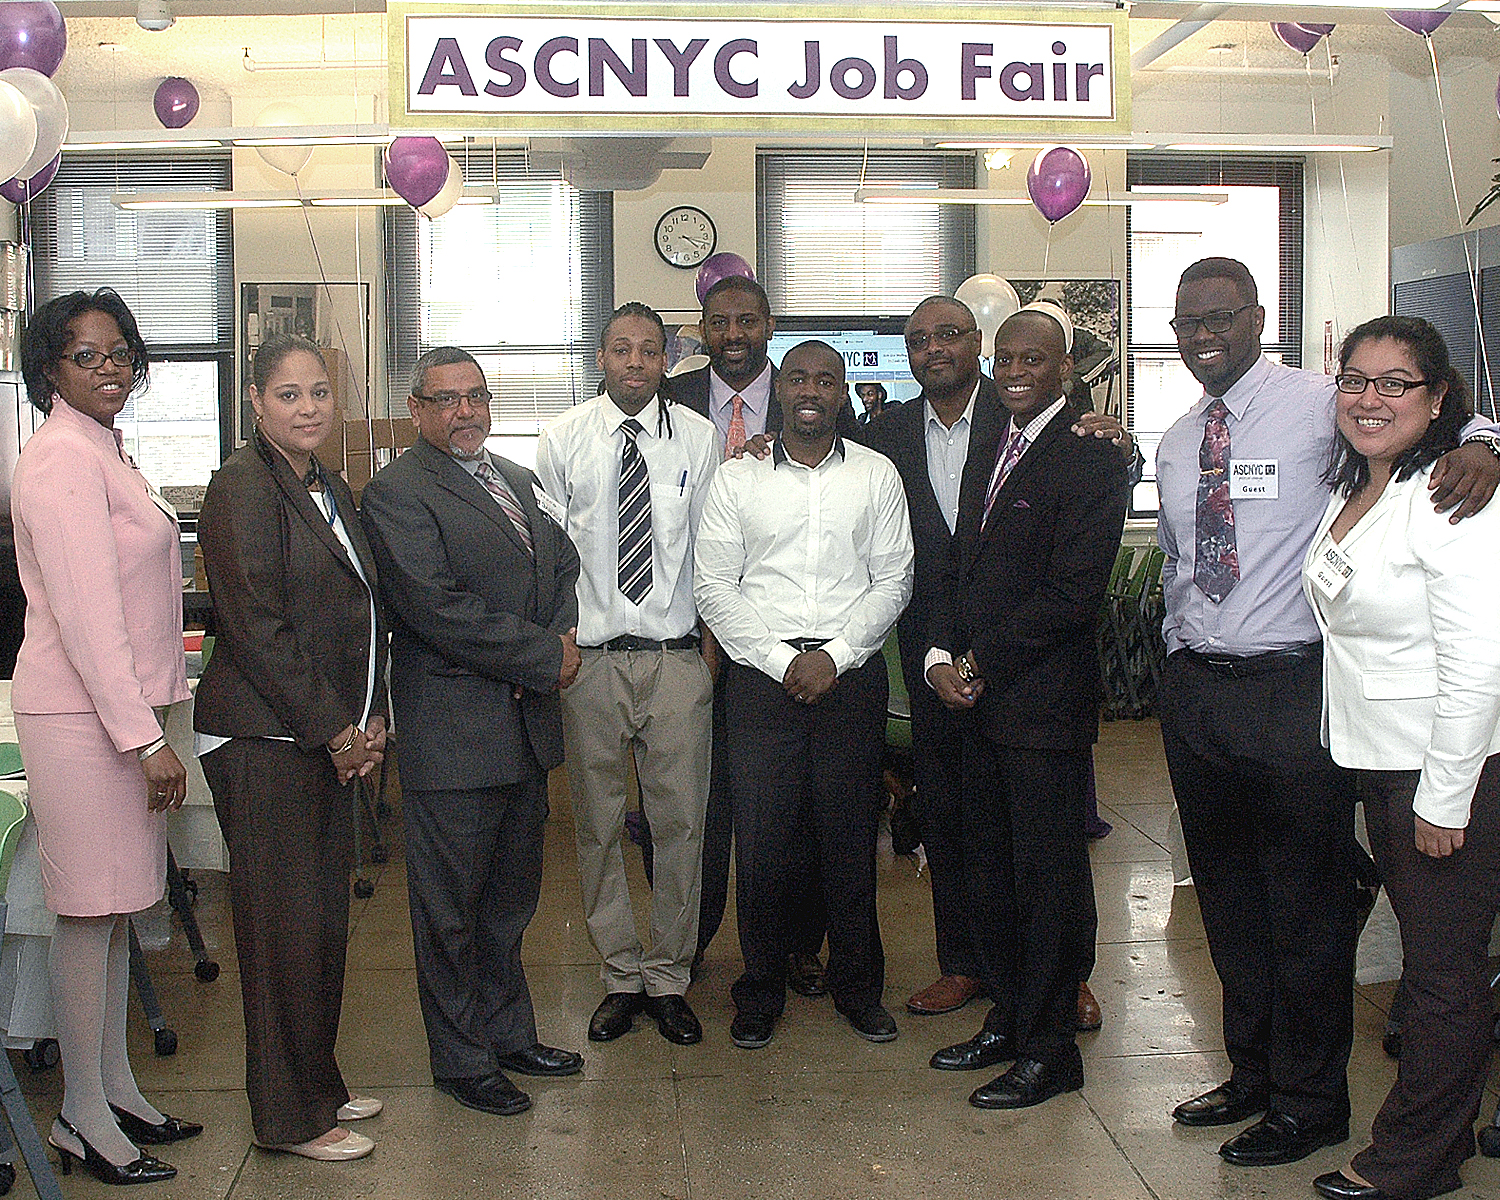 Jean Pierre Louis, Dennis Martin with the Job Fair interviewers and an attendee